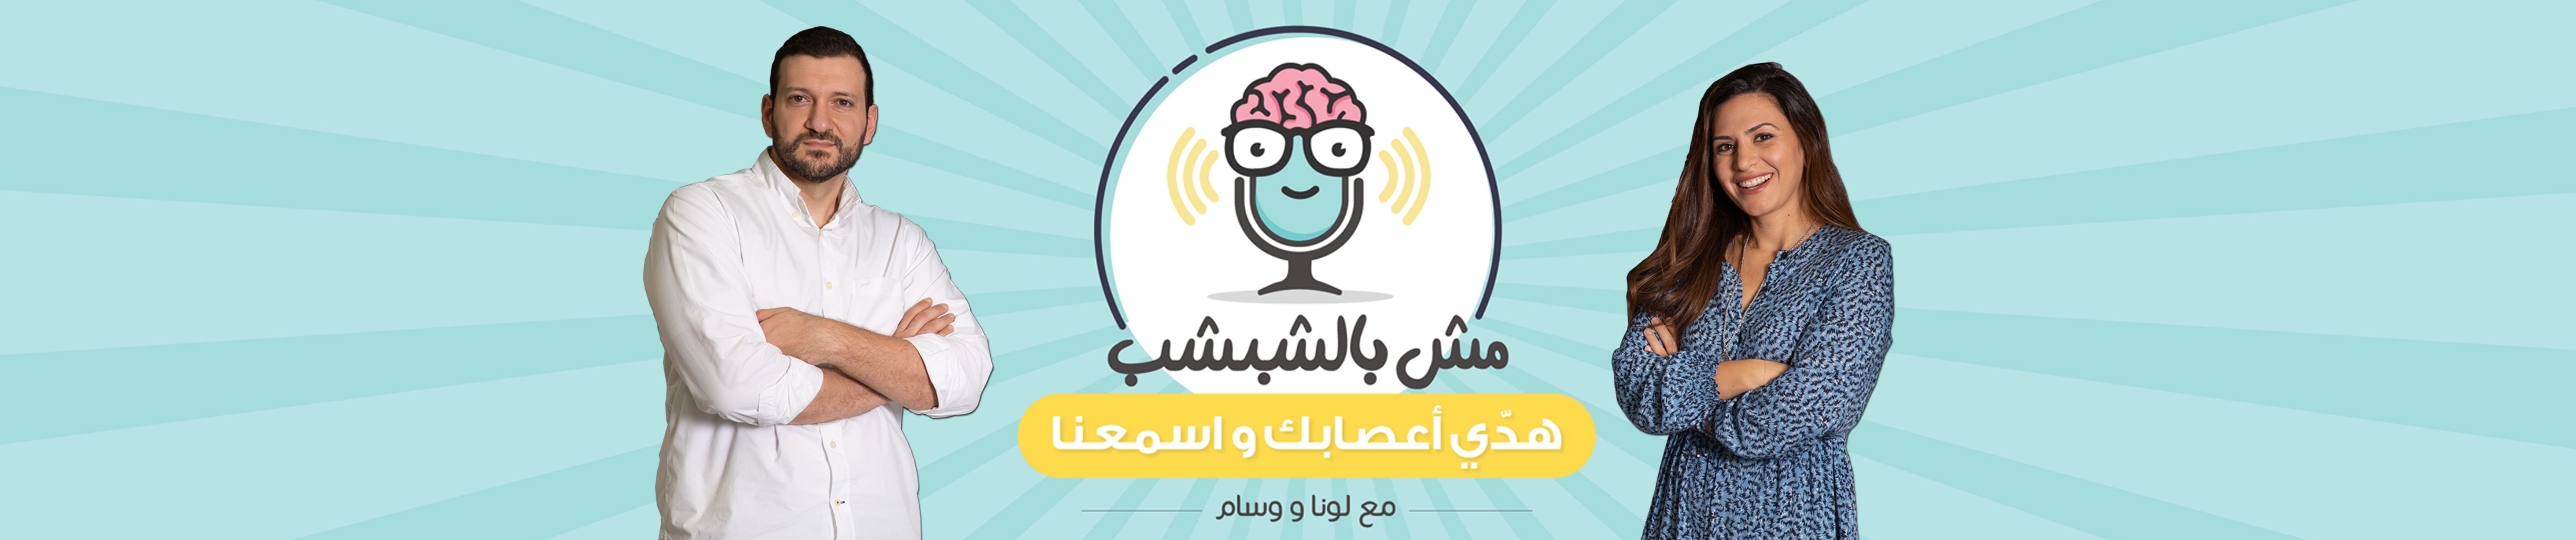 Stream mishbilshibshib - مش بالشبشب | Listen to podcast episodes online for  free on SoundCloud